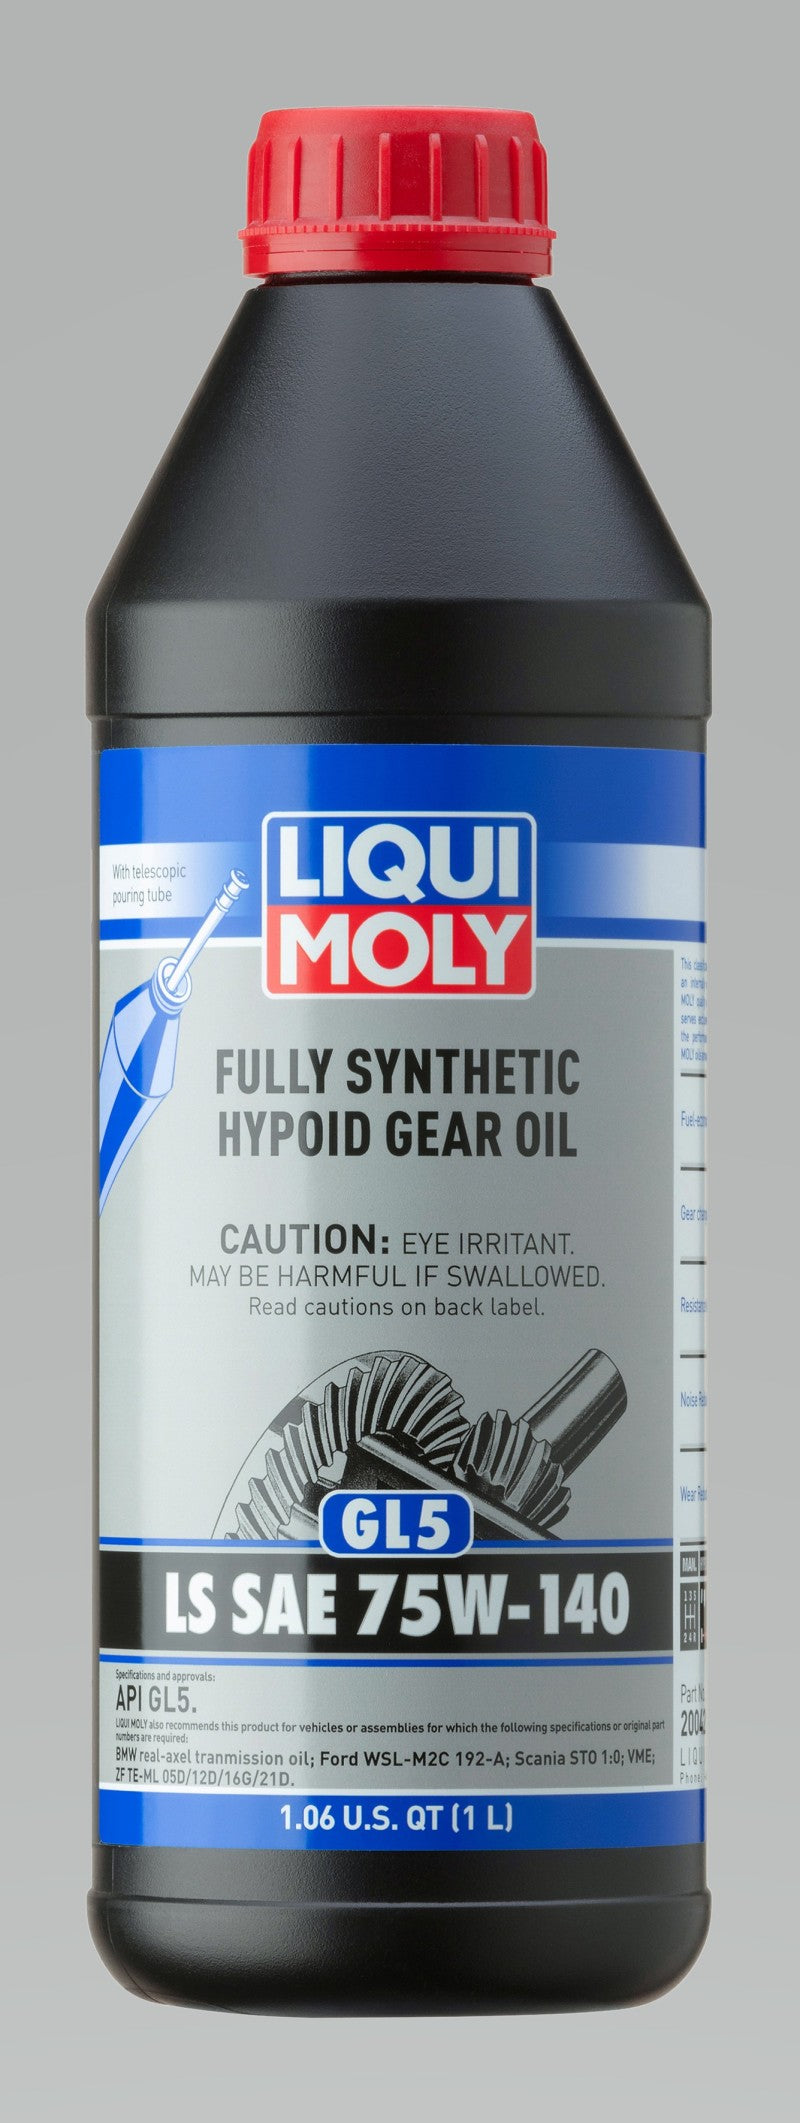 LIQUI MOLY 1L Fully Synthetic Hypoid Gear Oil (GL5) LS SAE 75W140 - Single